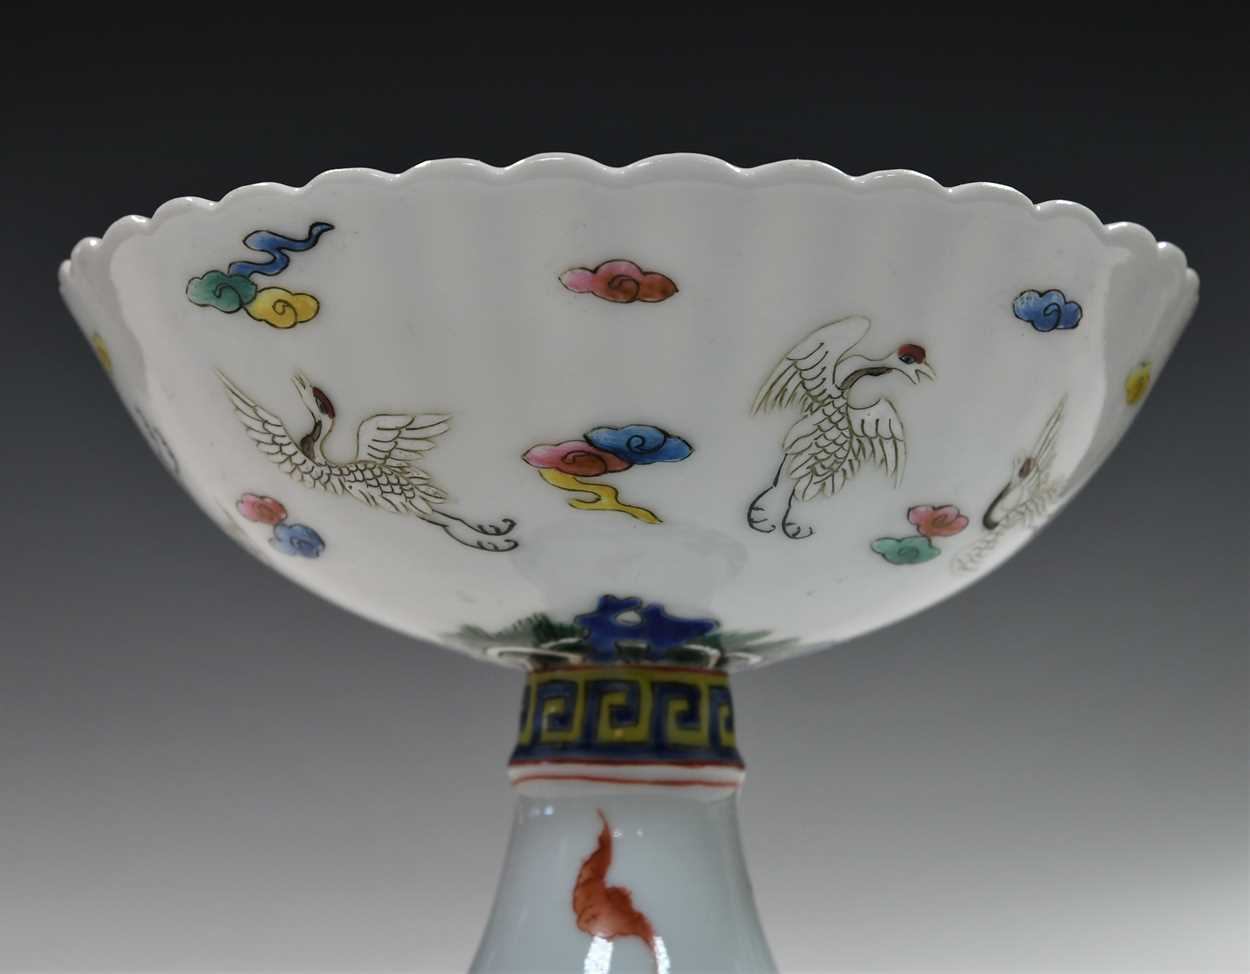 A Chinese famille rose porcelain saucer dish, Qing Dynasty, late 18th century, - Image 7 of 36